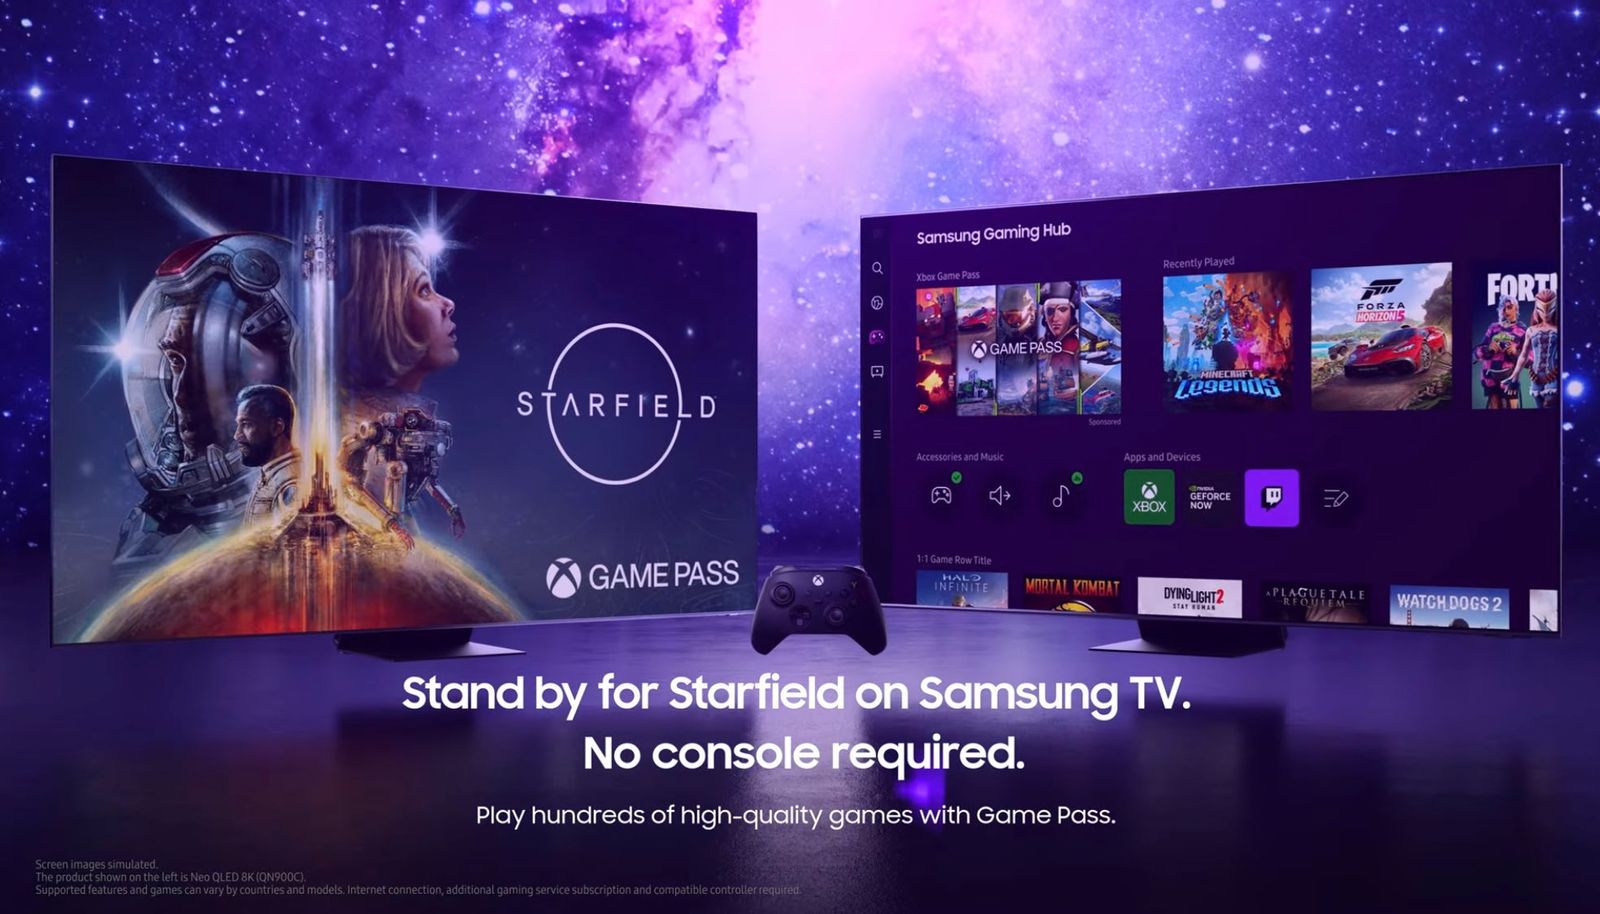 Samsung televisions are shown playing starfield via game pass